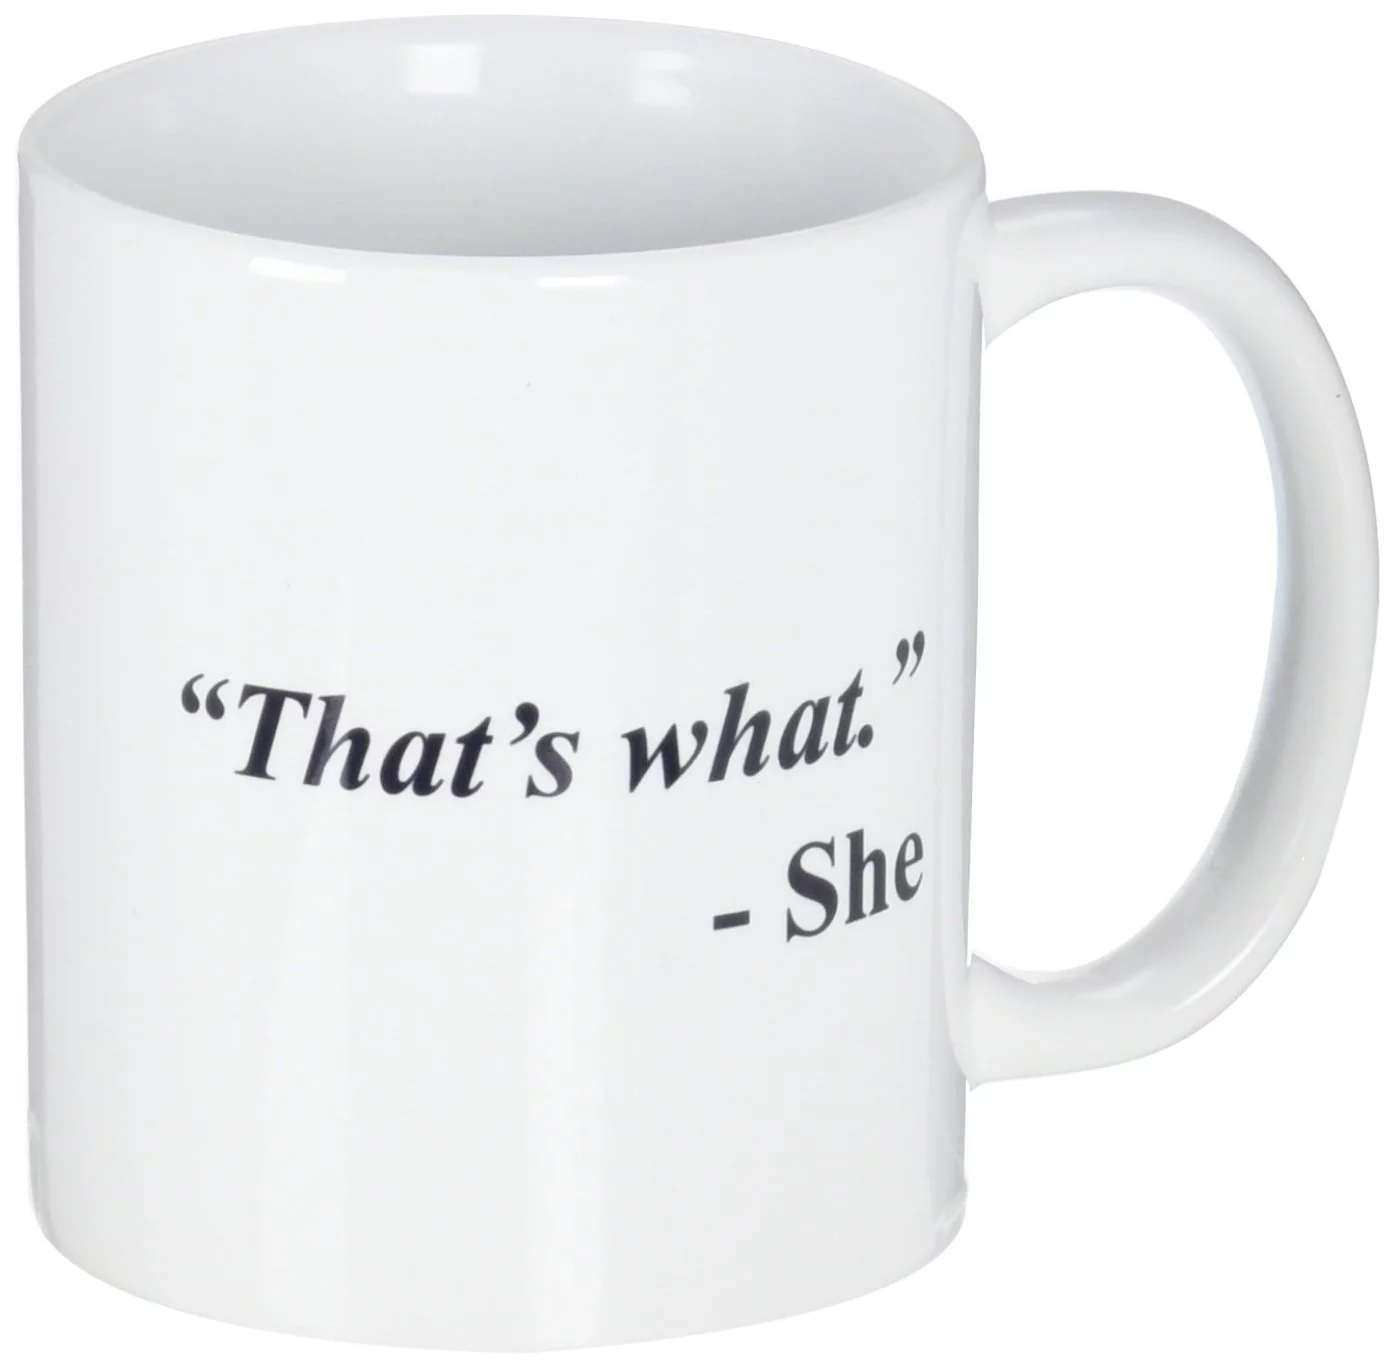 Best Coworker Gifts 2022: Funny That's What She Said Mug for Boss 2022